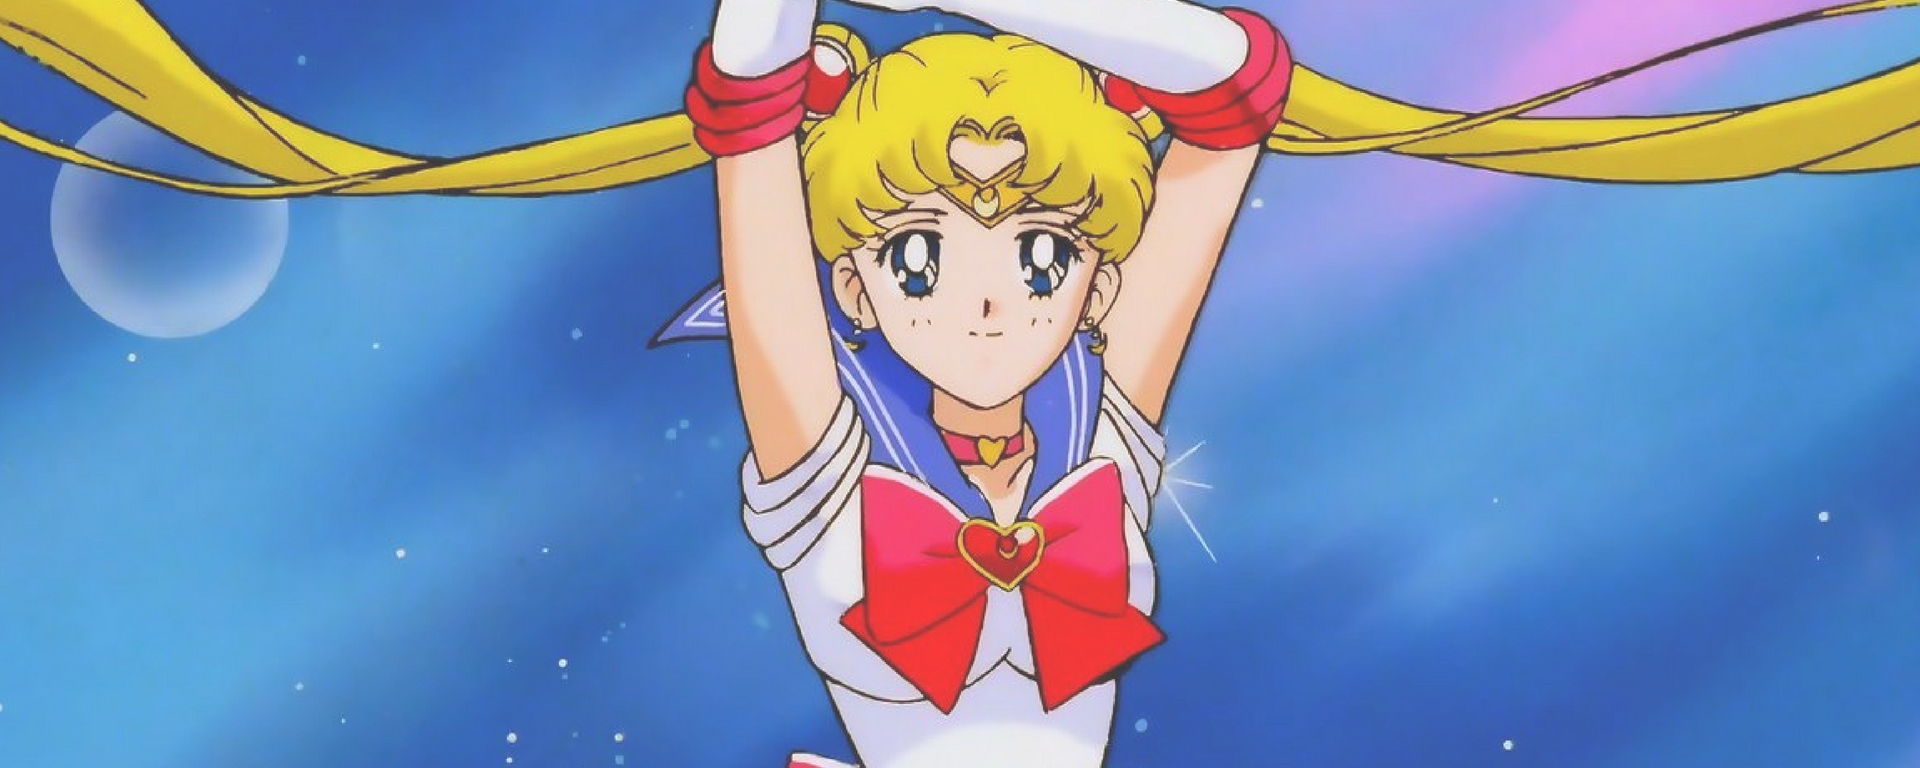 Sailor Moon Live Wallpapers